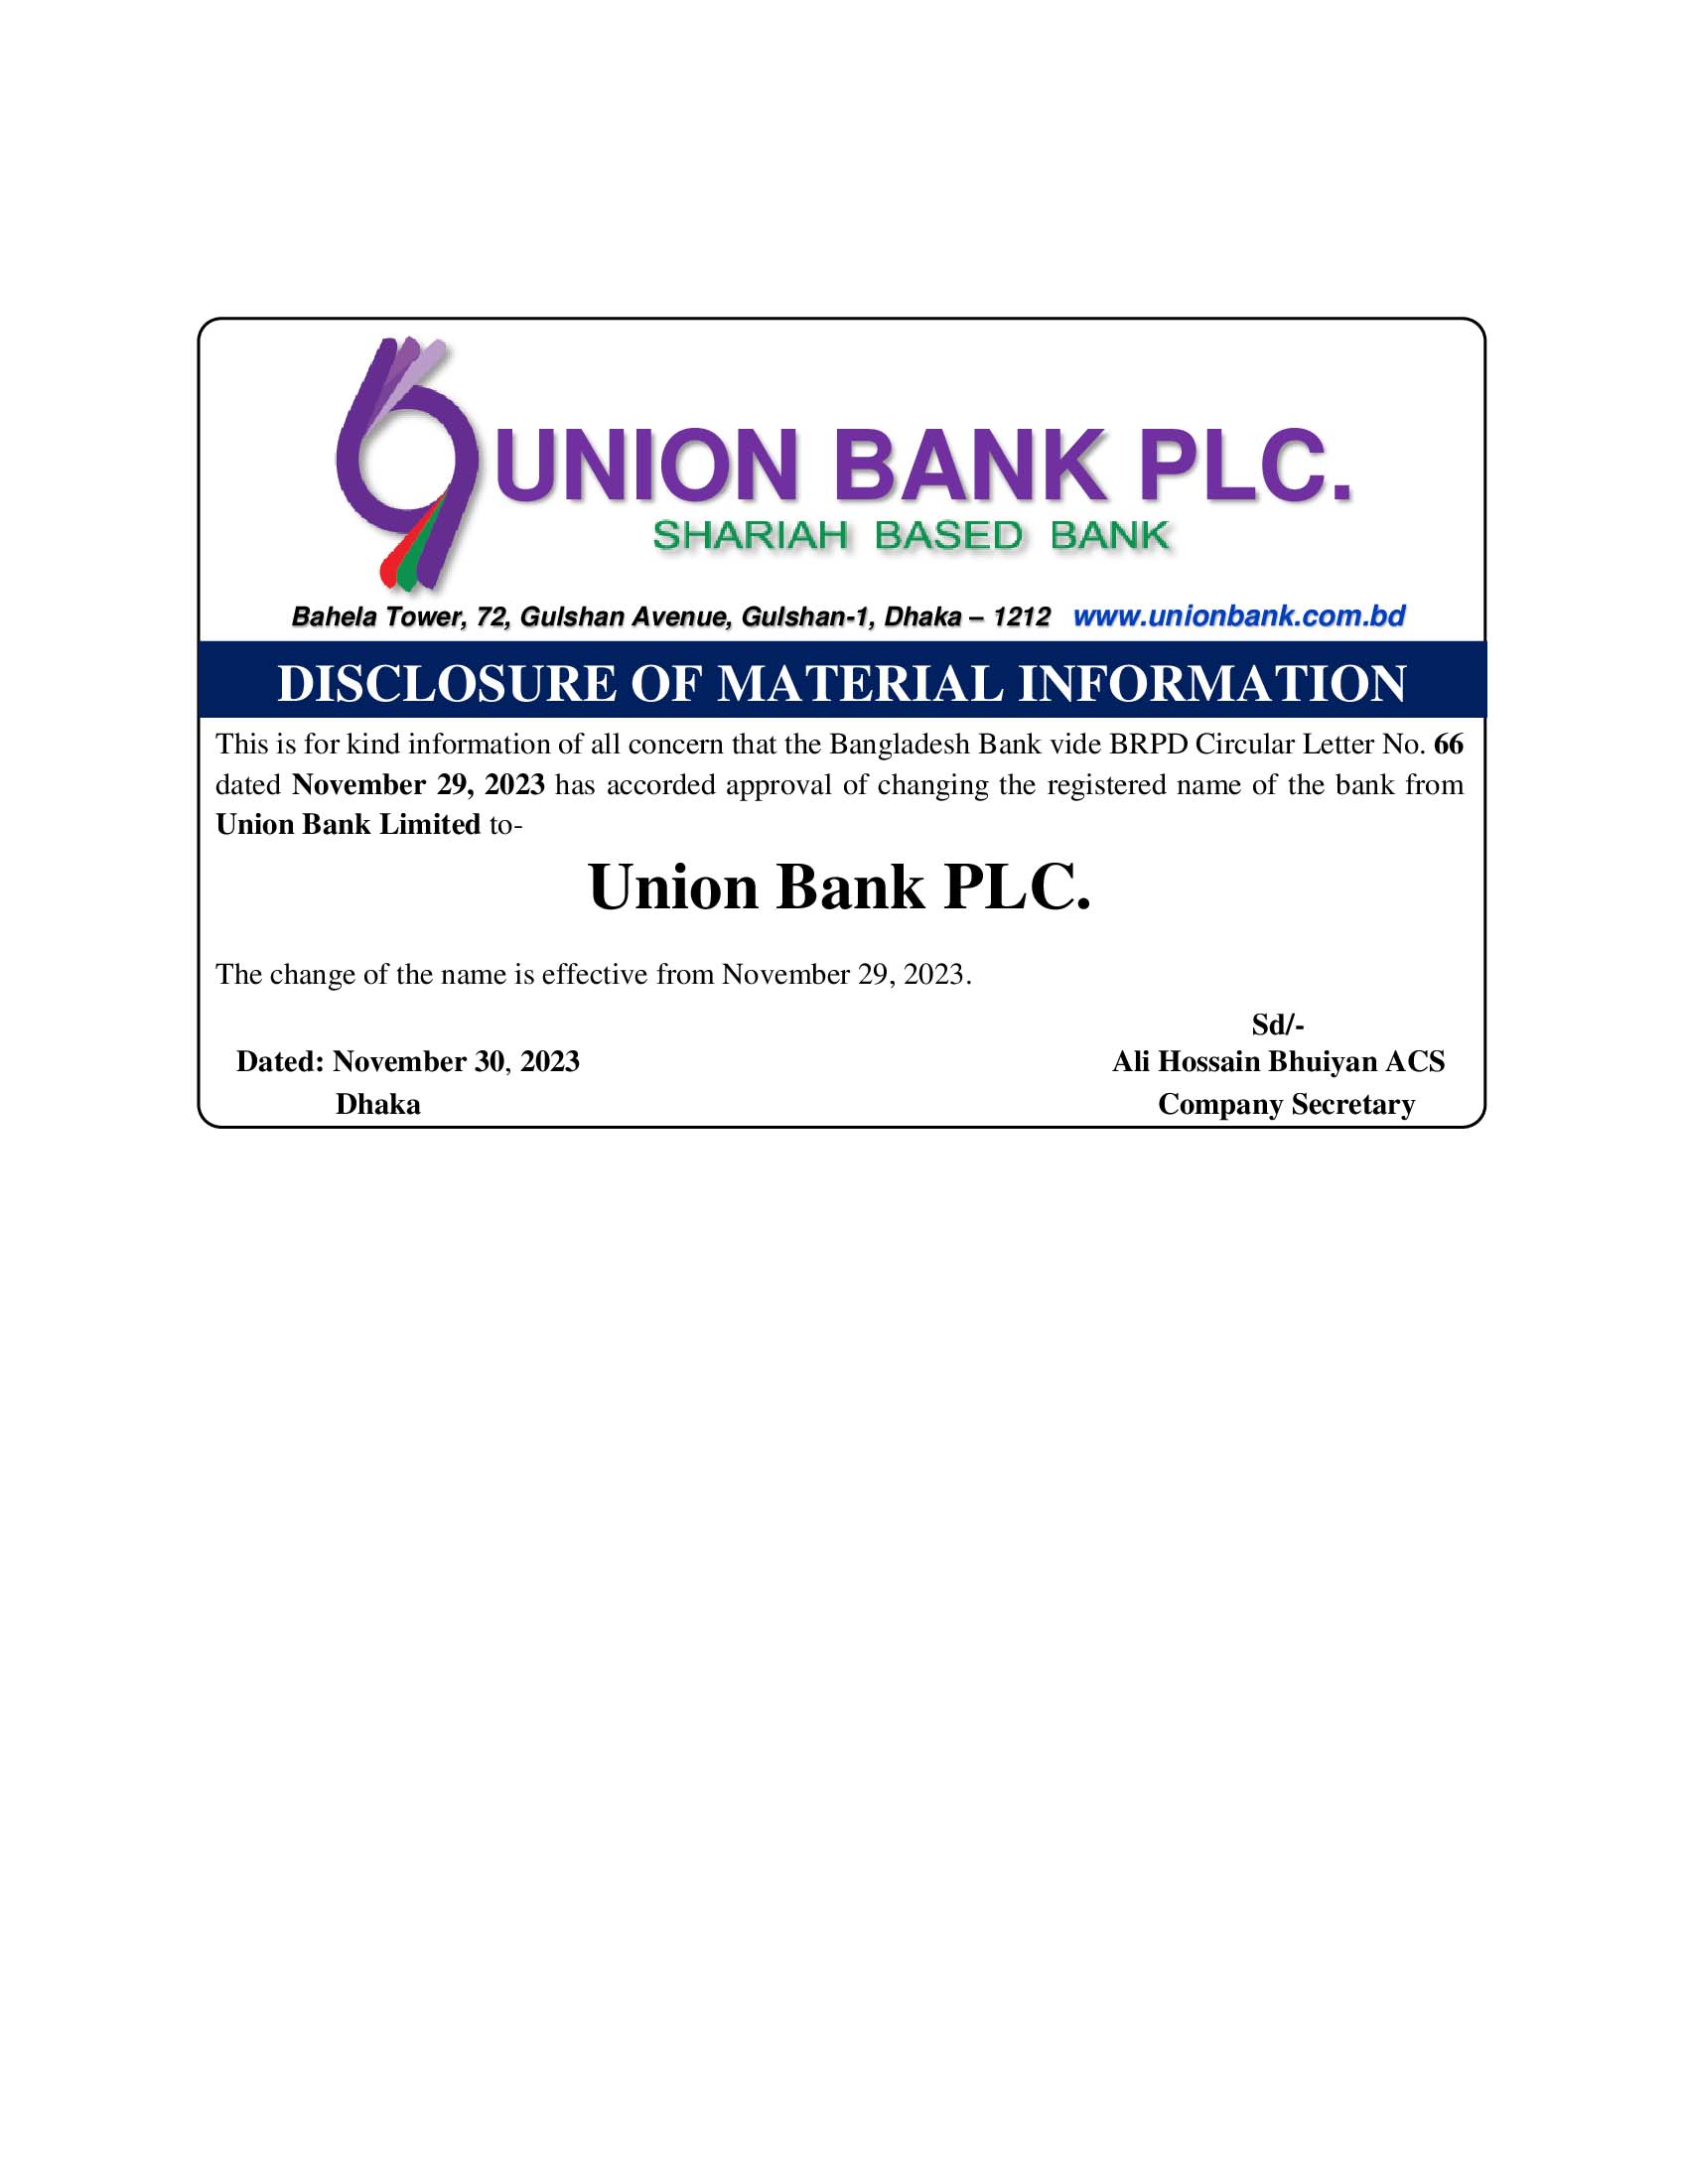 DISCLOSURE OF MATERIAL INFORMATION  UNION BANK PLC